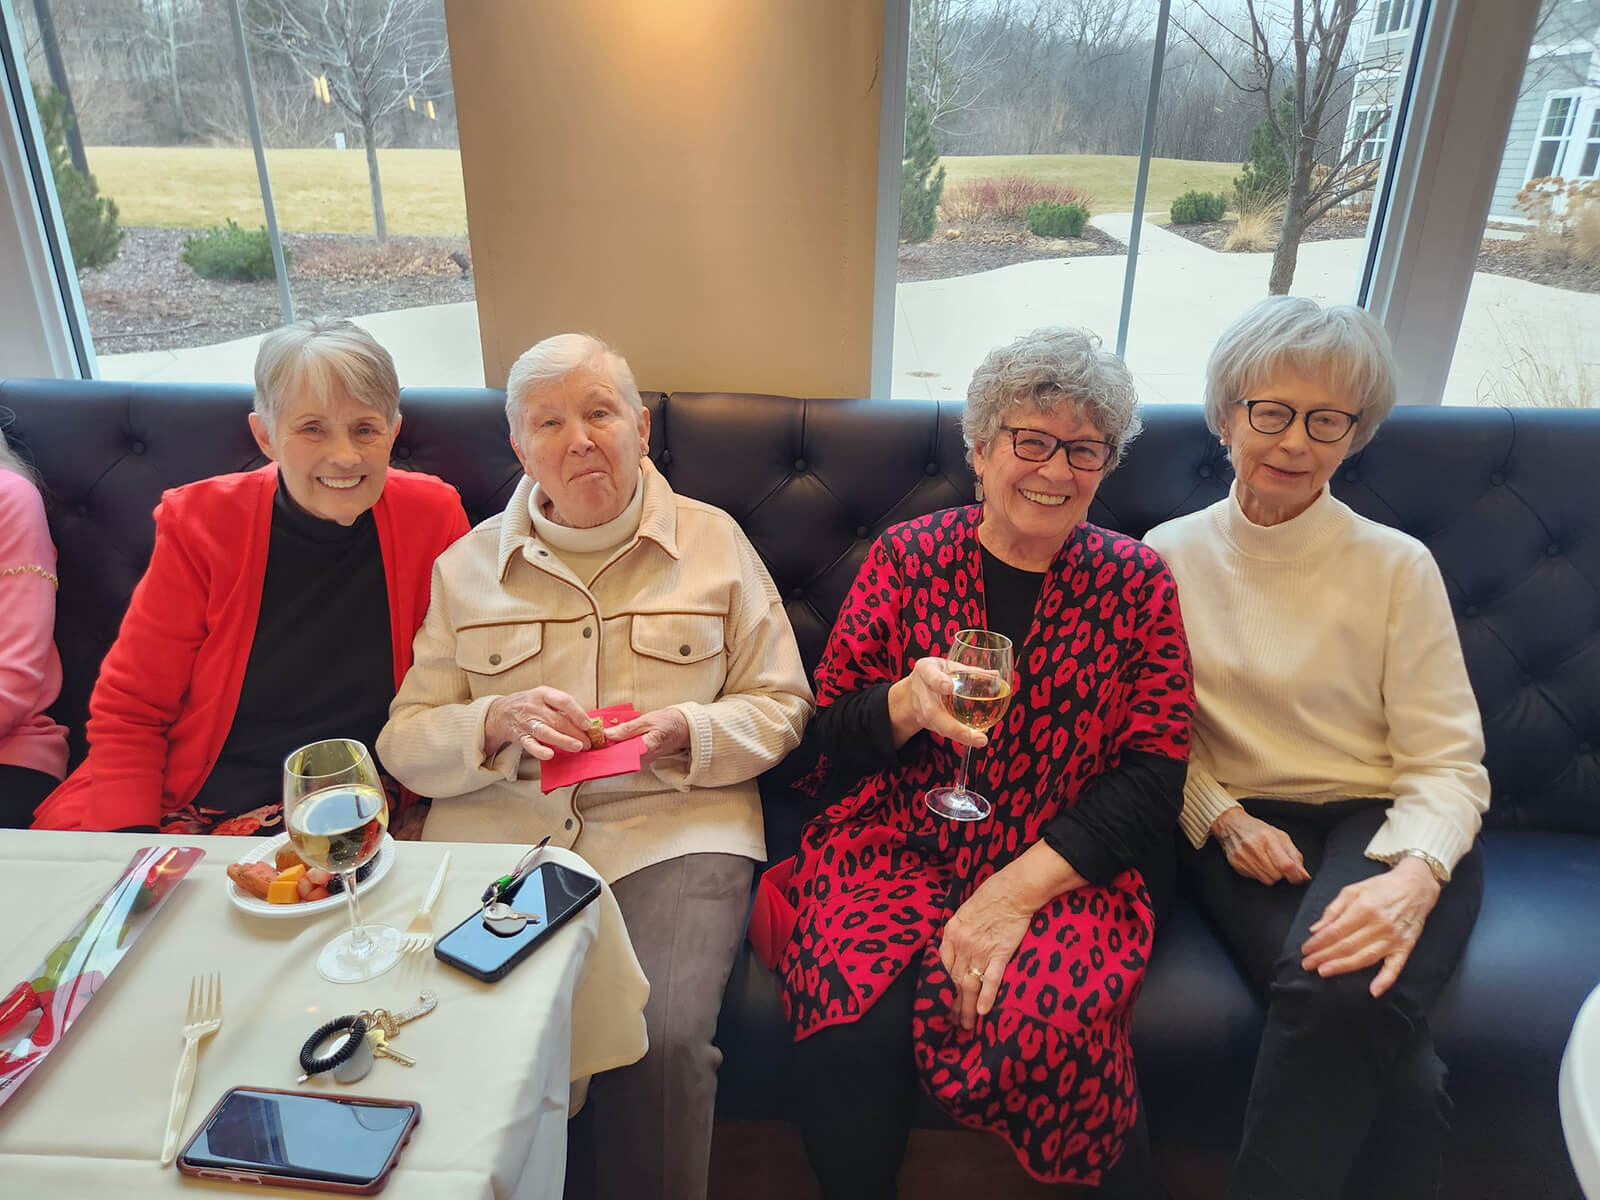 A group of joyful seniors at The Waters of Excelsior sharing stories and toasting with glasses of wine during a social gathering.